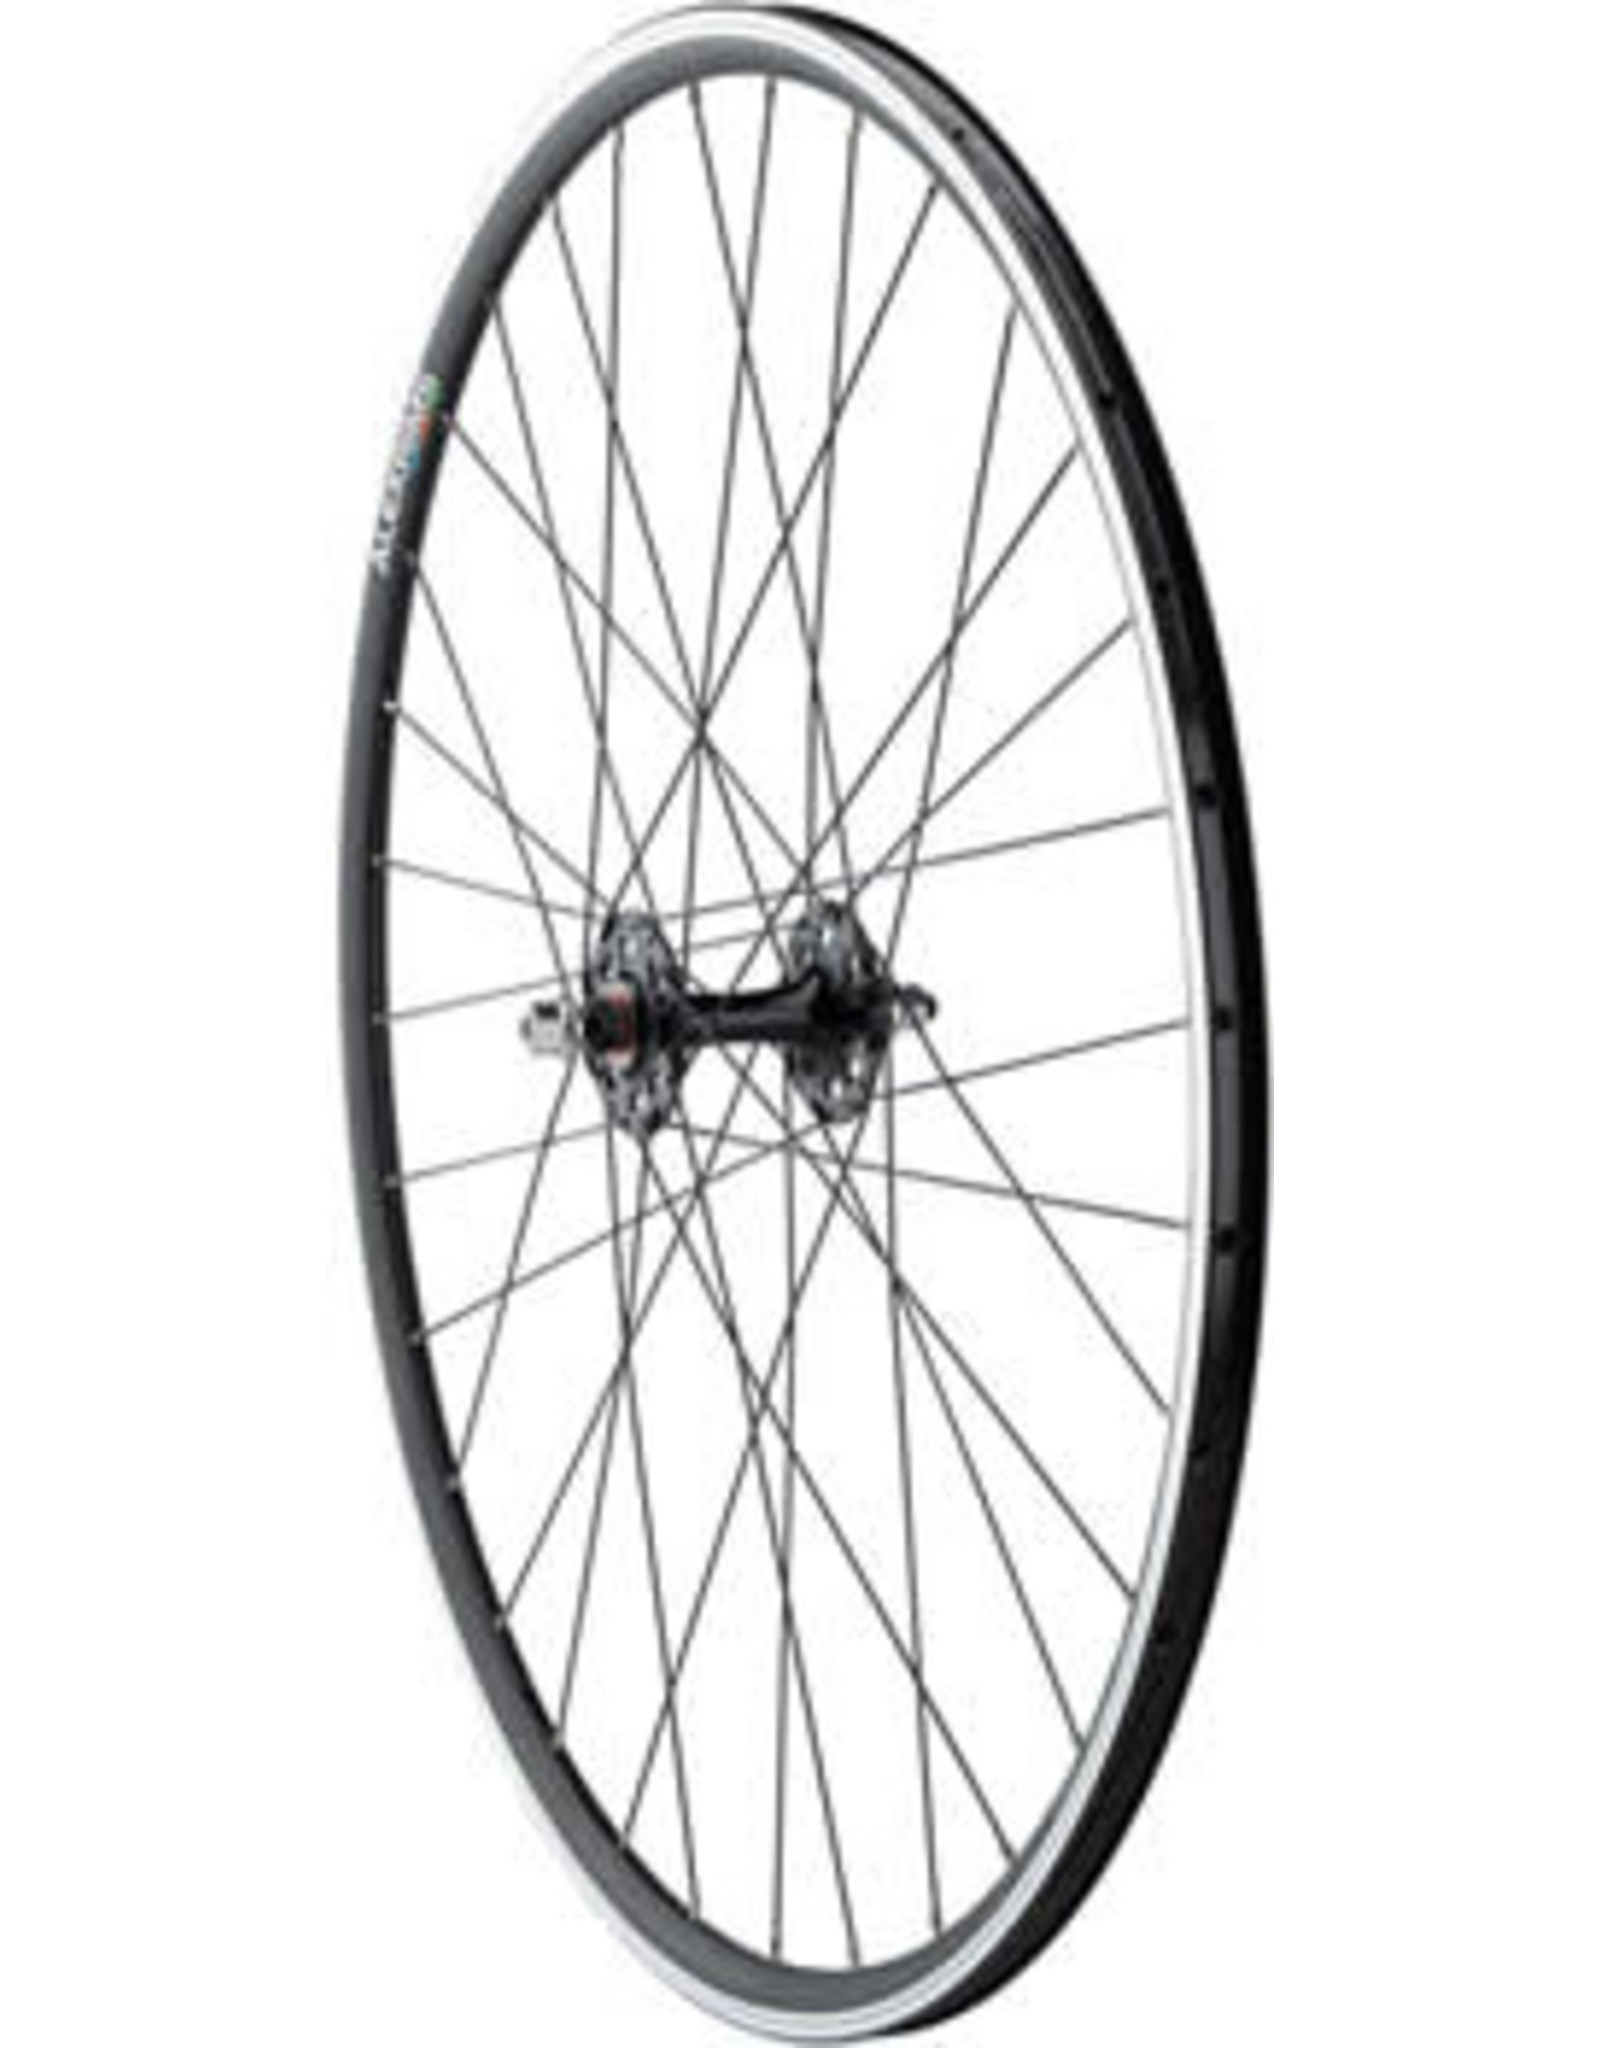 Quality Wheels Quality Wheels Value Double Wall Series Track Front Wheel - 700, 9x1 Threaded x 100mm, Rim Brake, Black, Clincher